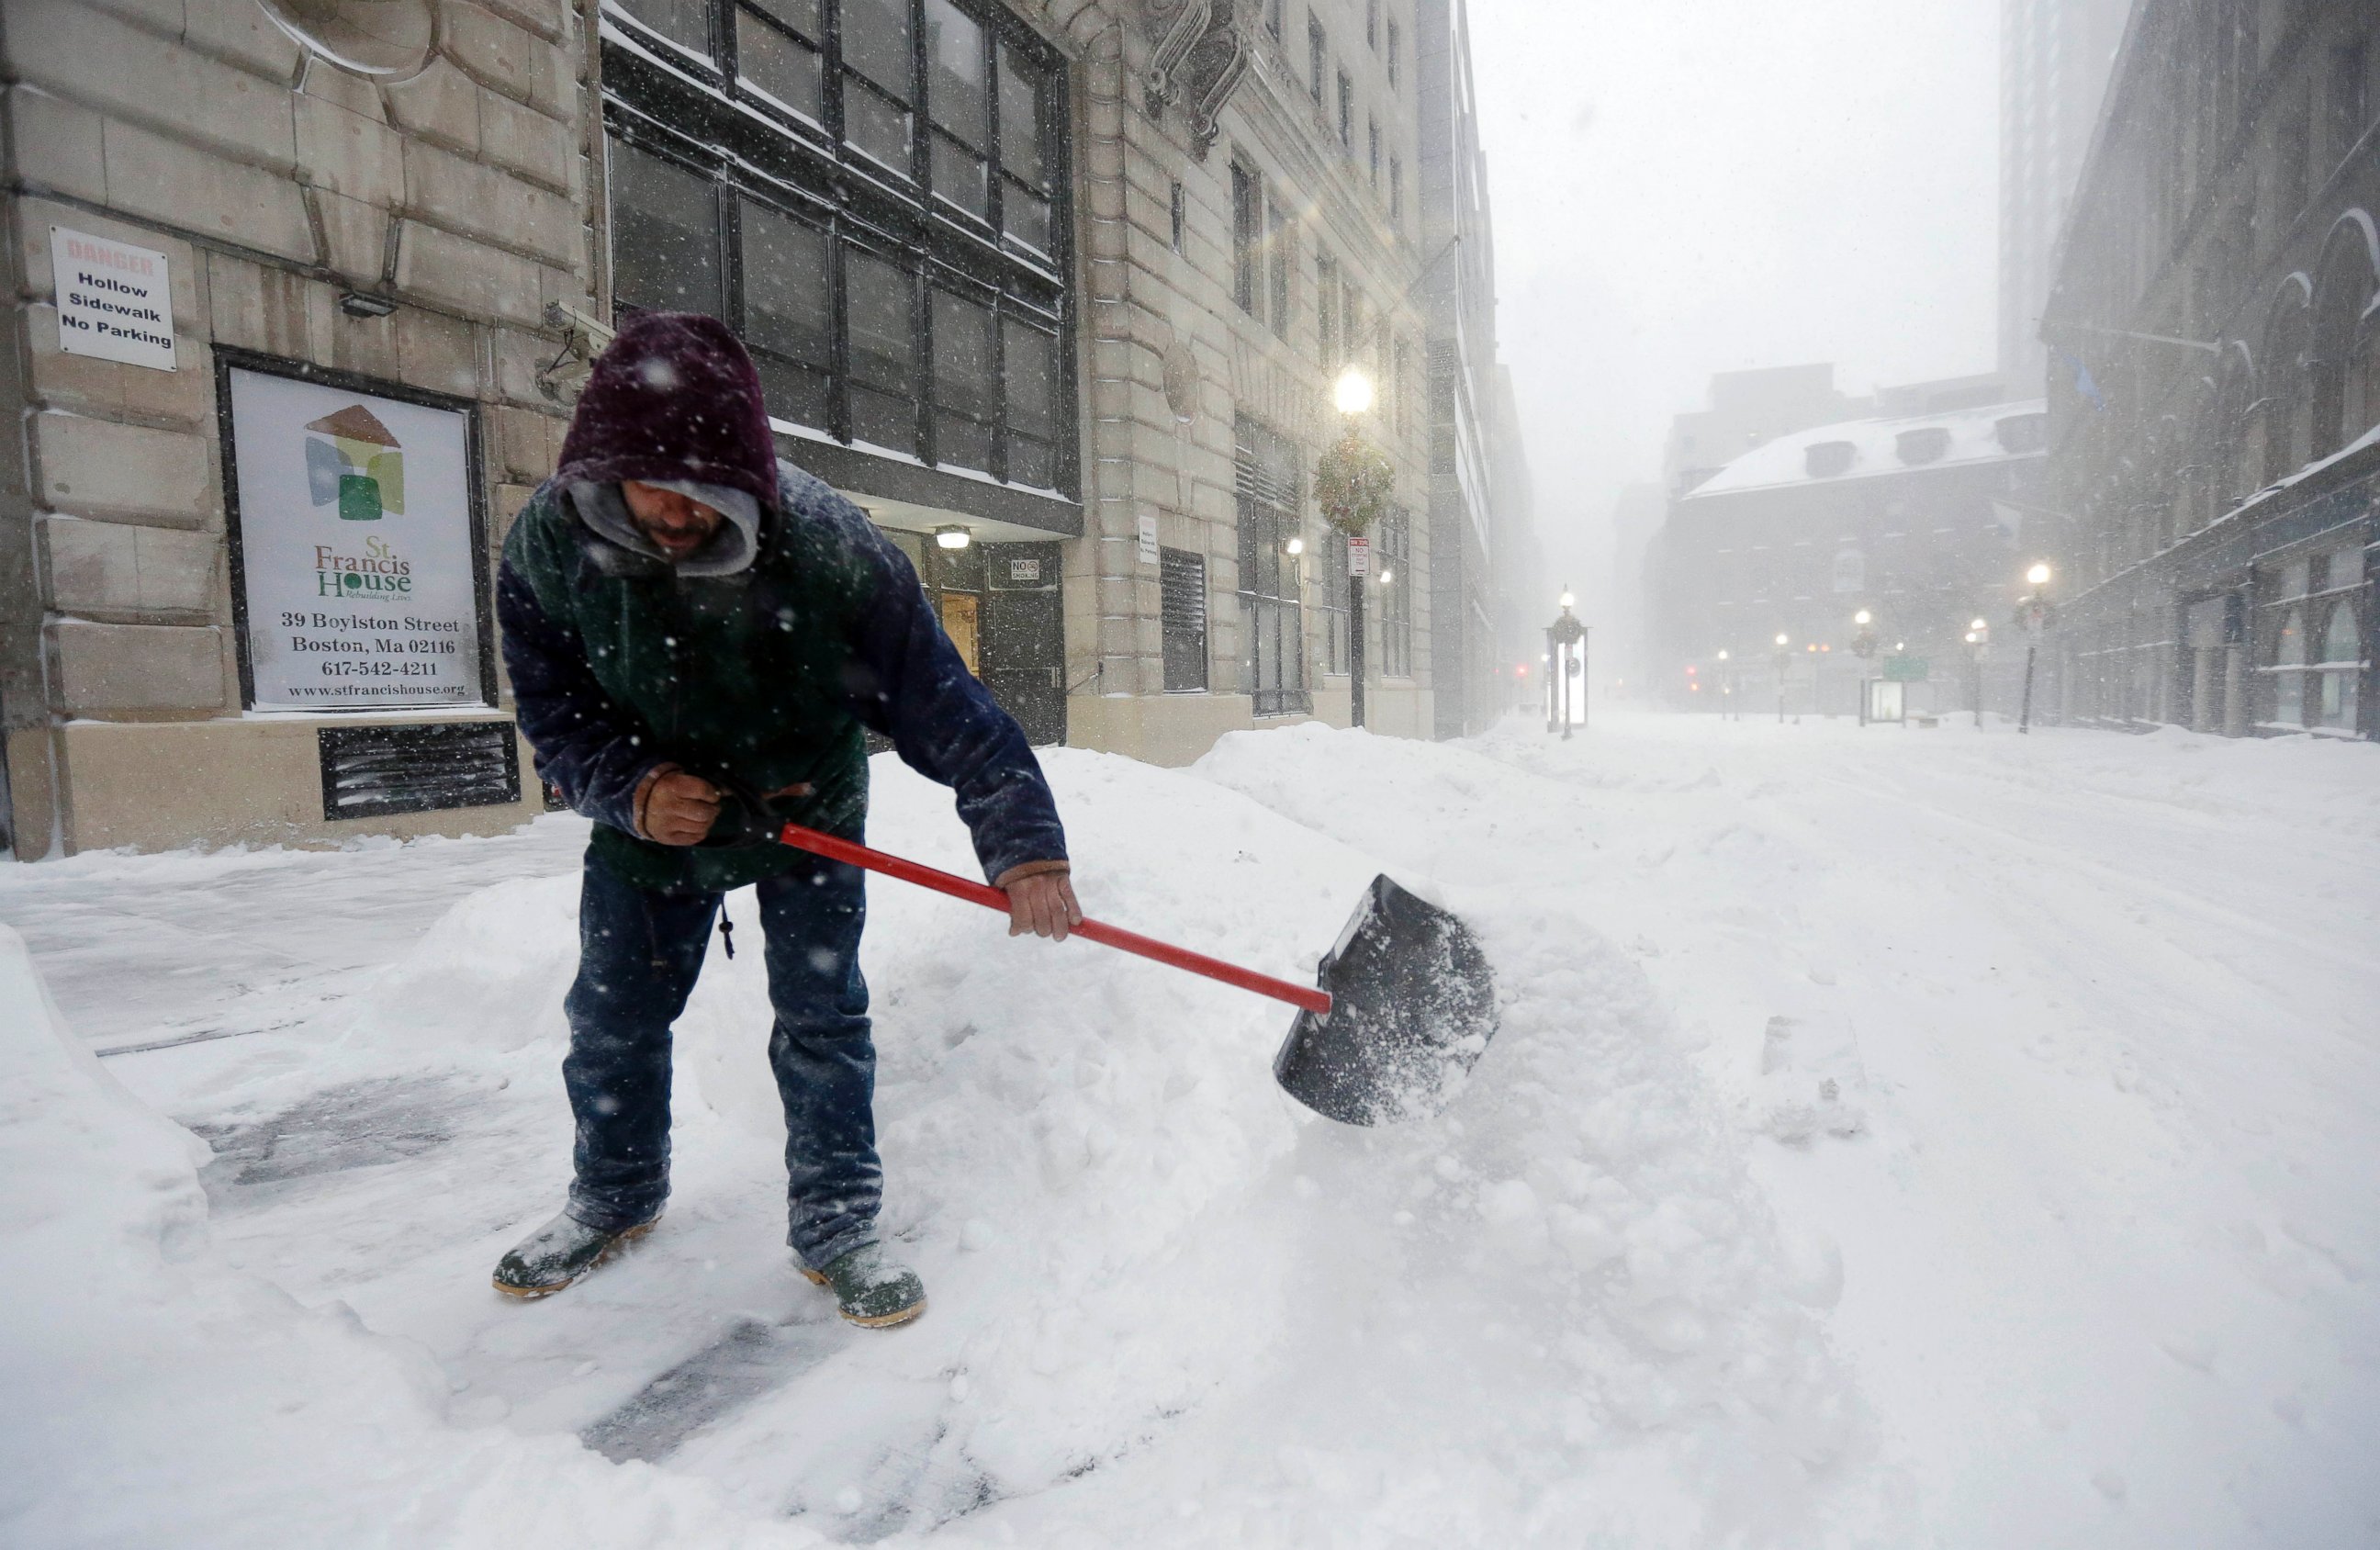 PHOTO: A worker shovels snow from a sidewalk during a winter snowstorm, Jan. 27, 2015, in Boston.